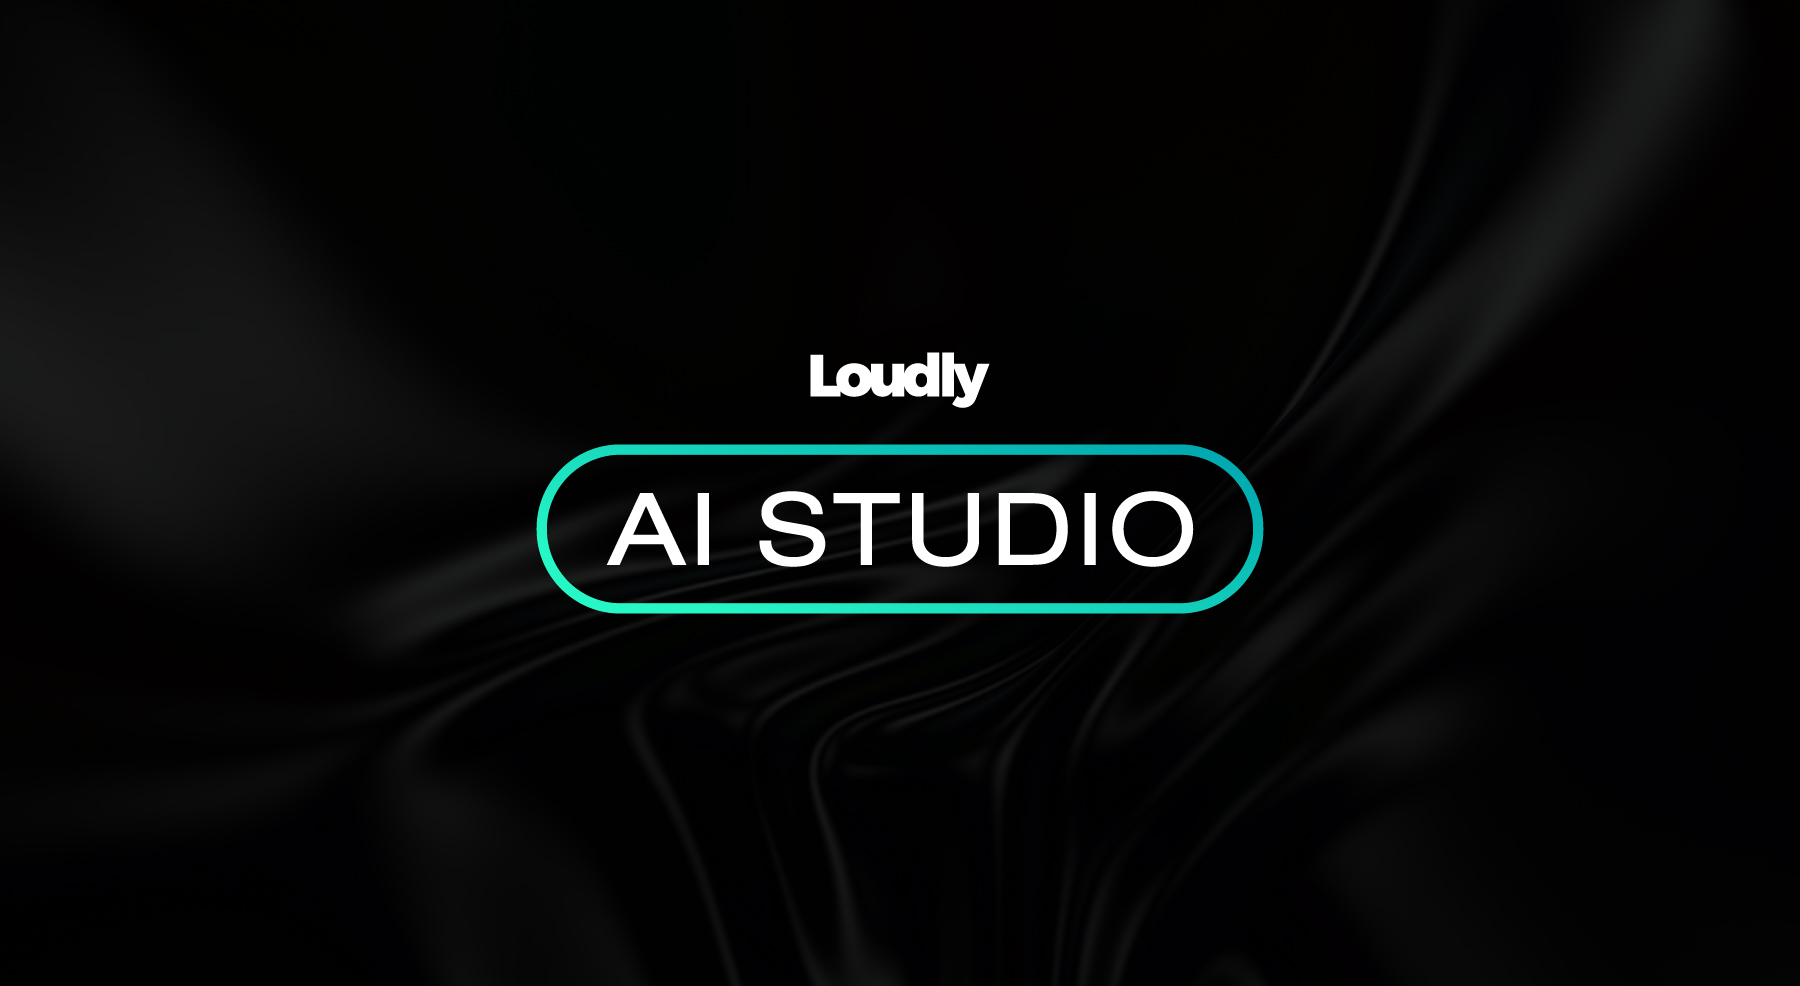 Loudly AI Studio adds new app features | MAG BLOG | Loudly